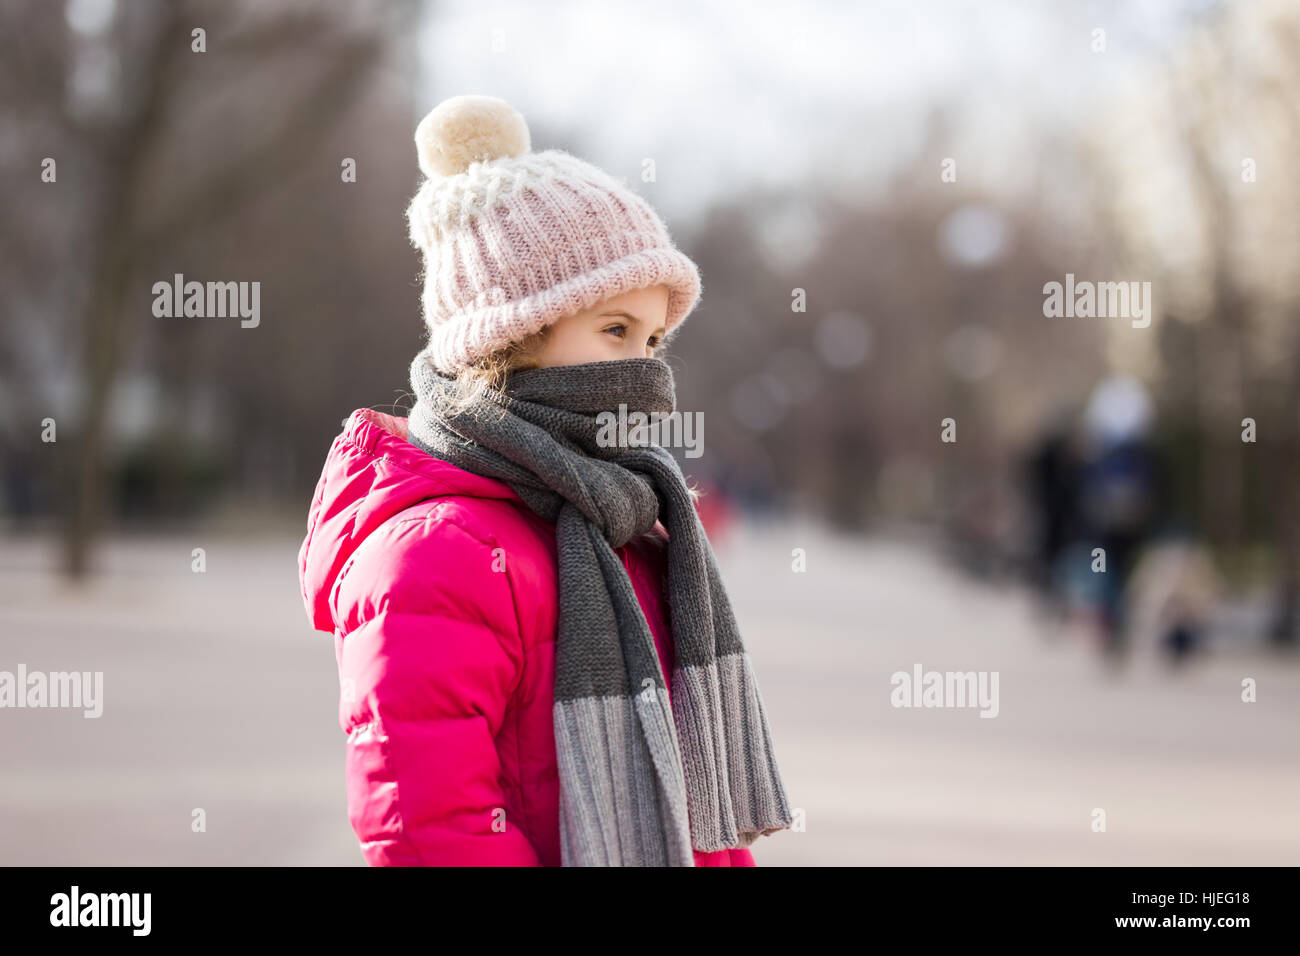 Closeup portrait of cute baby girl wearing knitted hat and winter jacket outdoors Stock Photo